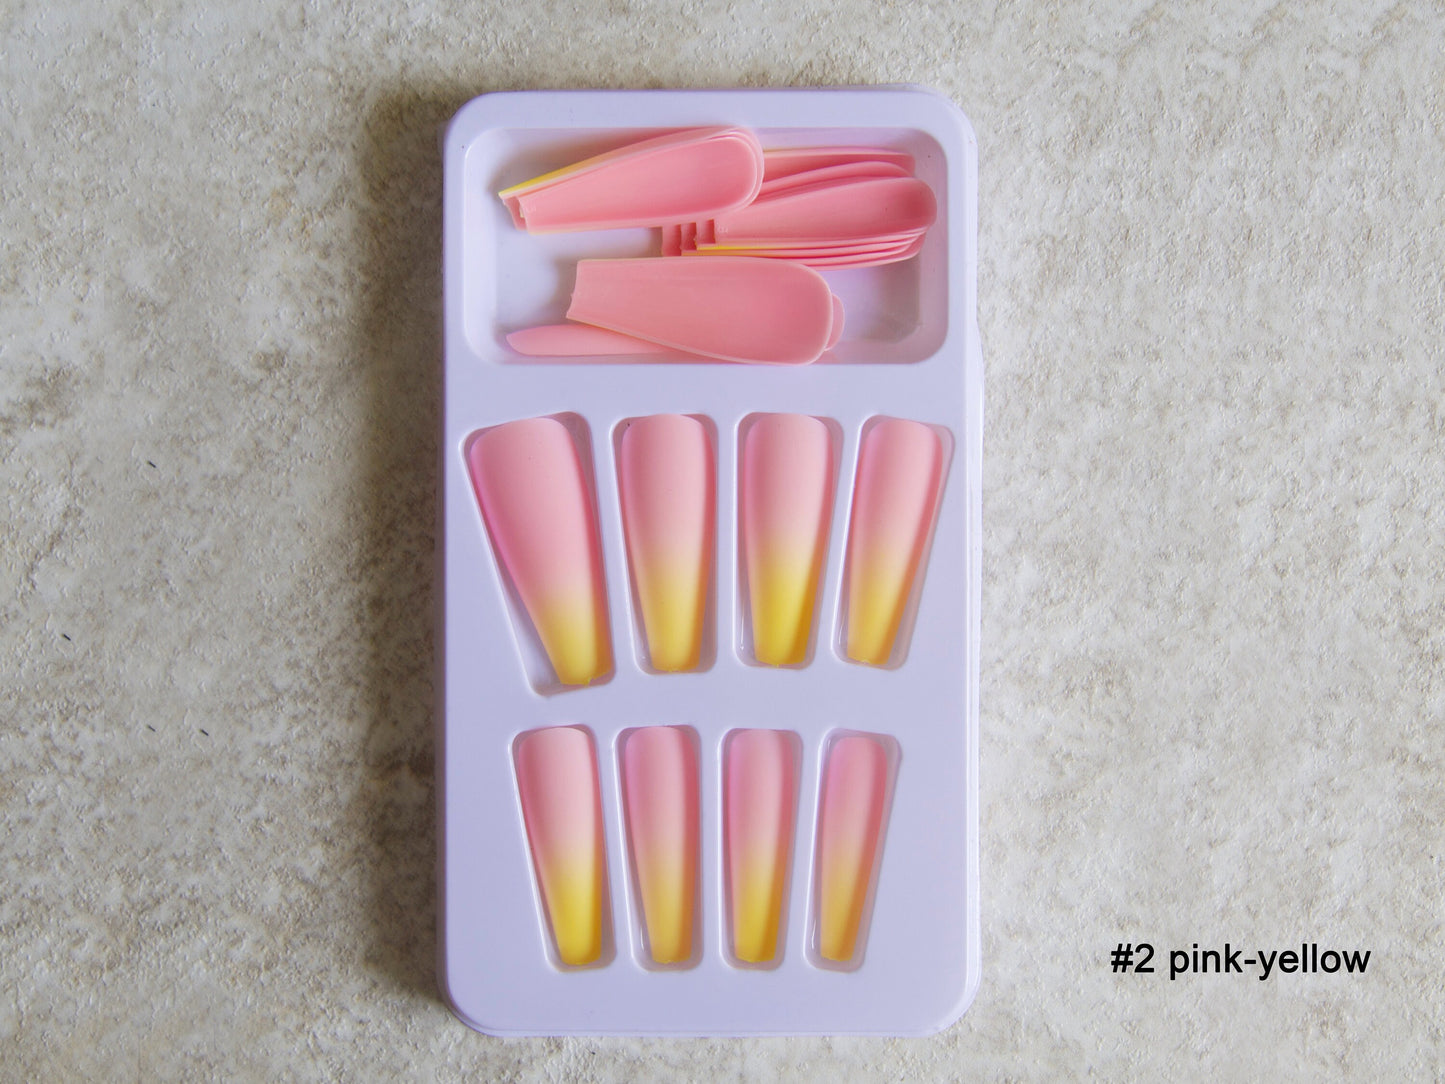 20 pcs Long Coffin Pastel Gradient on Nails/ Full cover Matted Bright Ombre Ready to wear Press ons Tips / Matte Fake Artificial Ins Nails